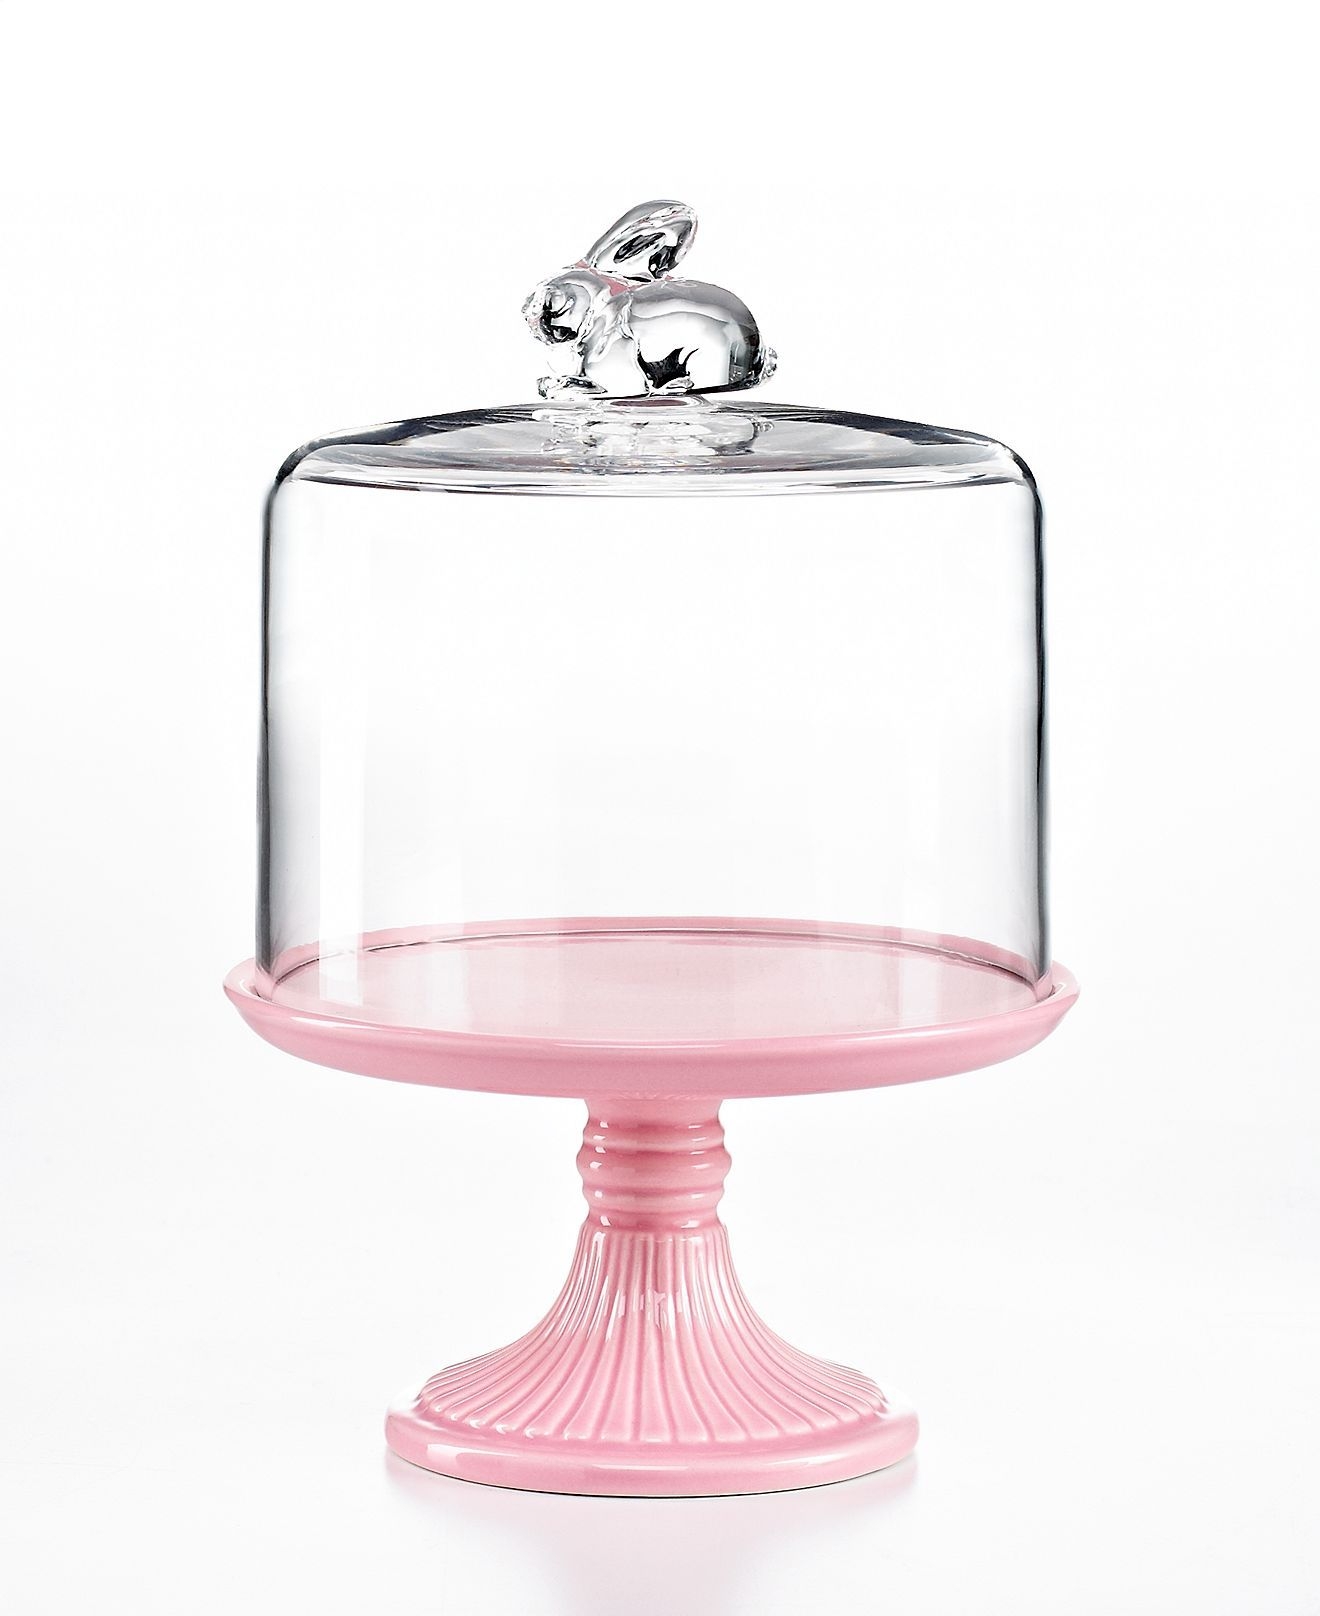 Pink cake stand with dome